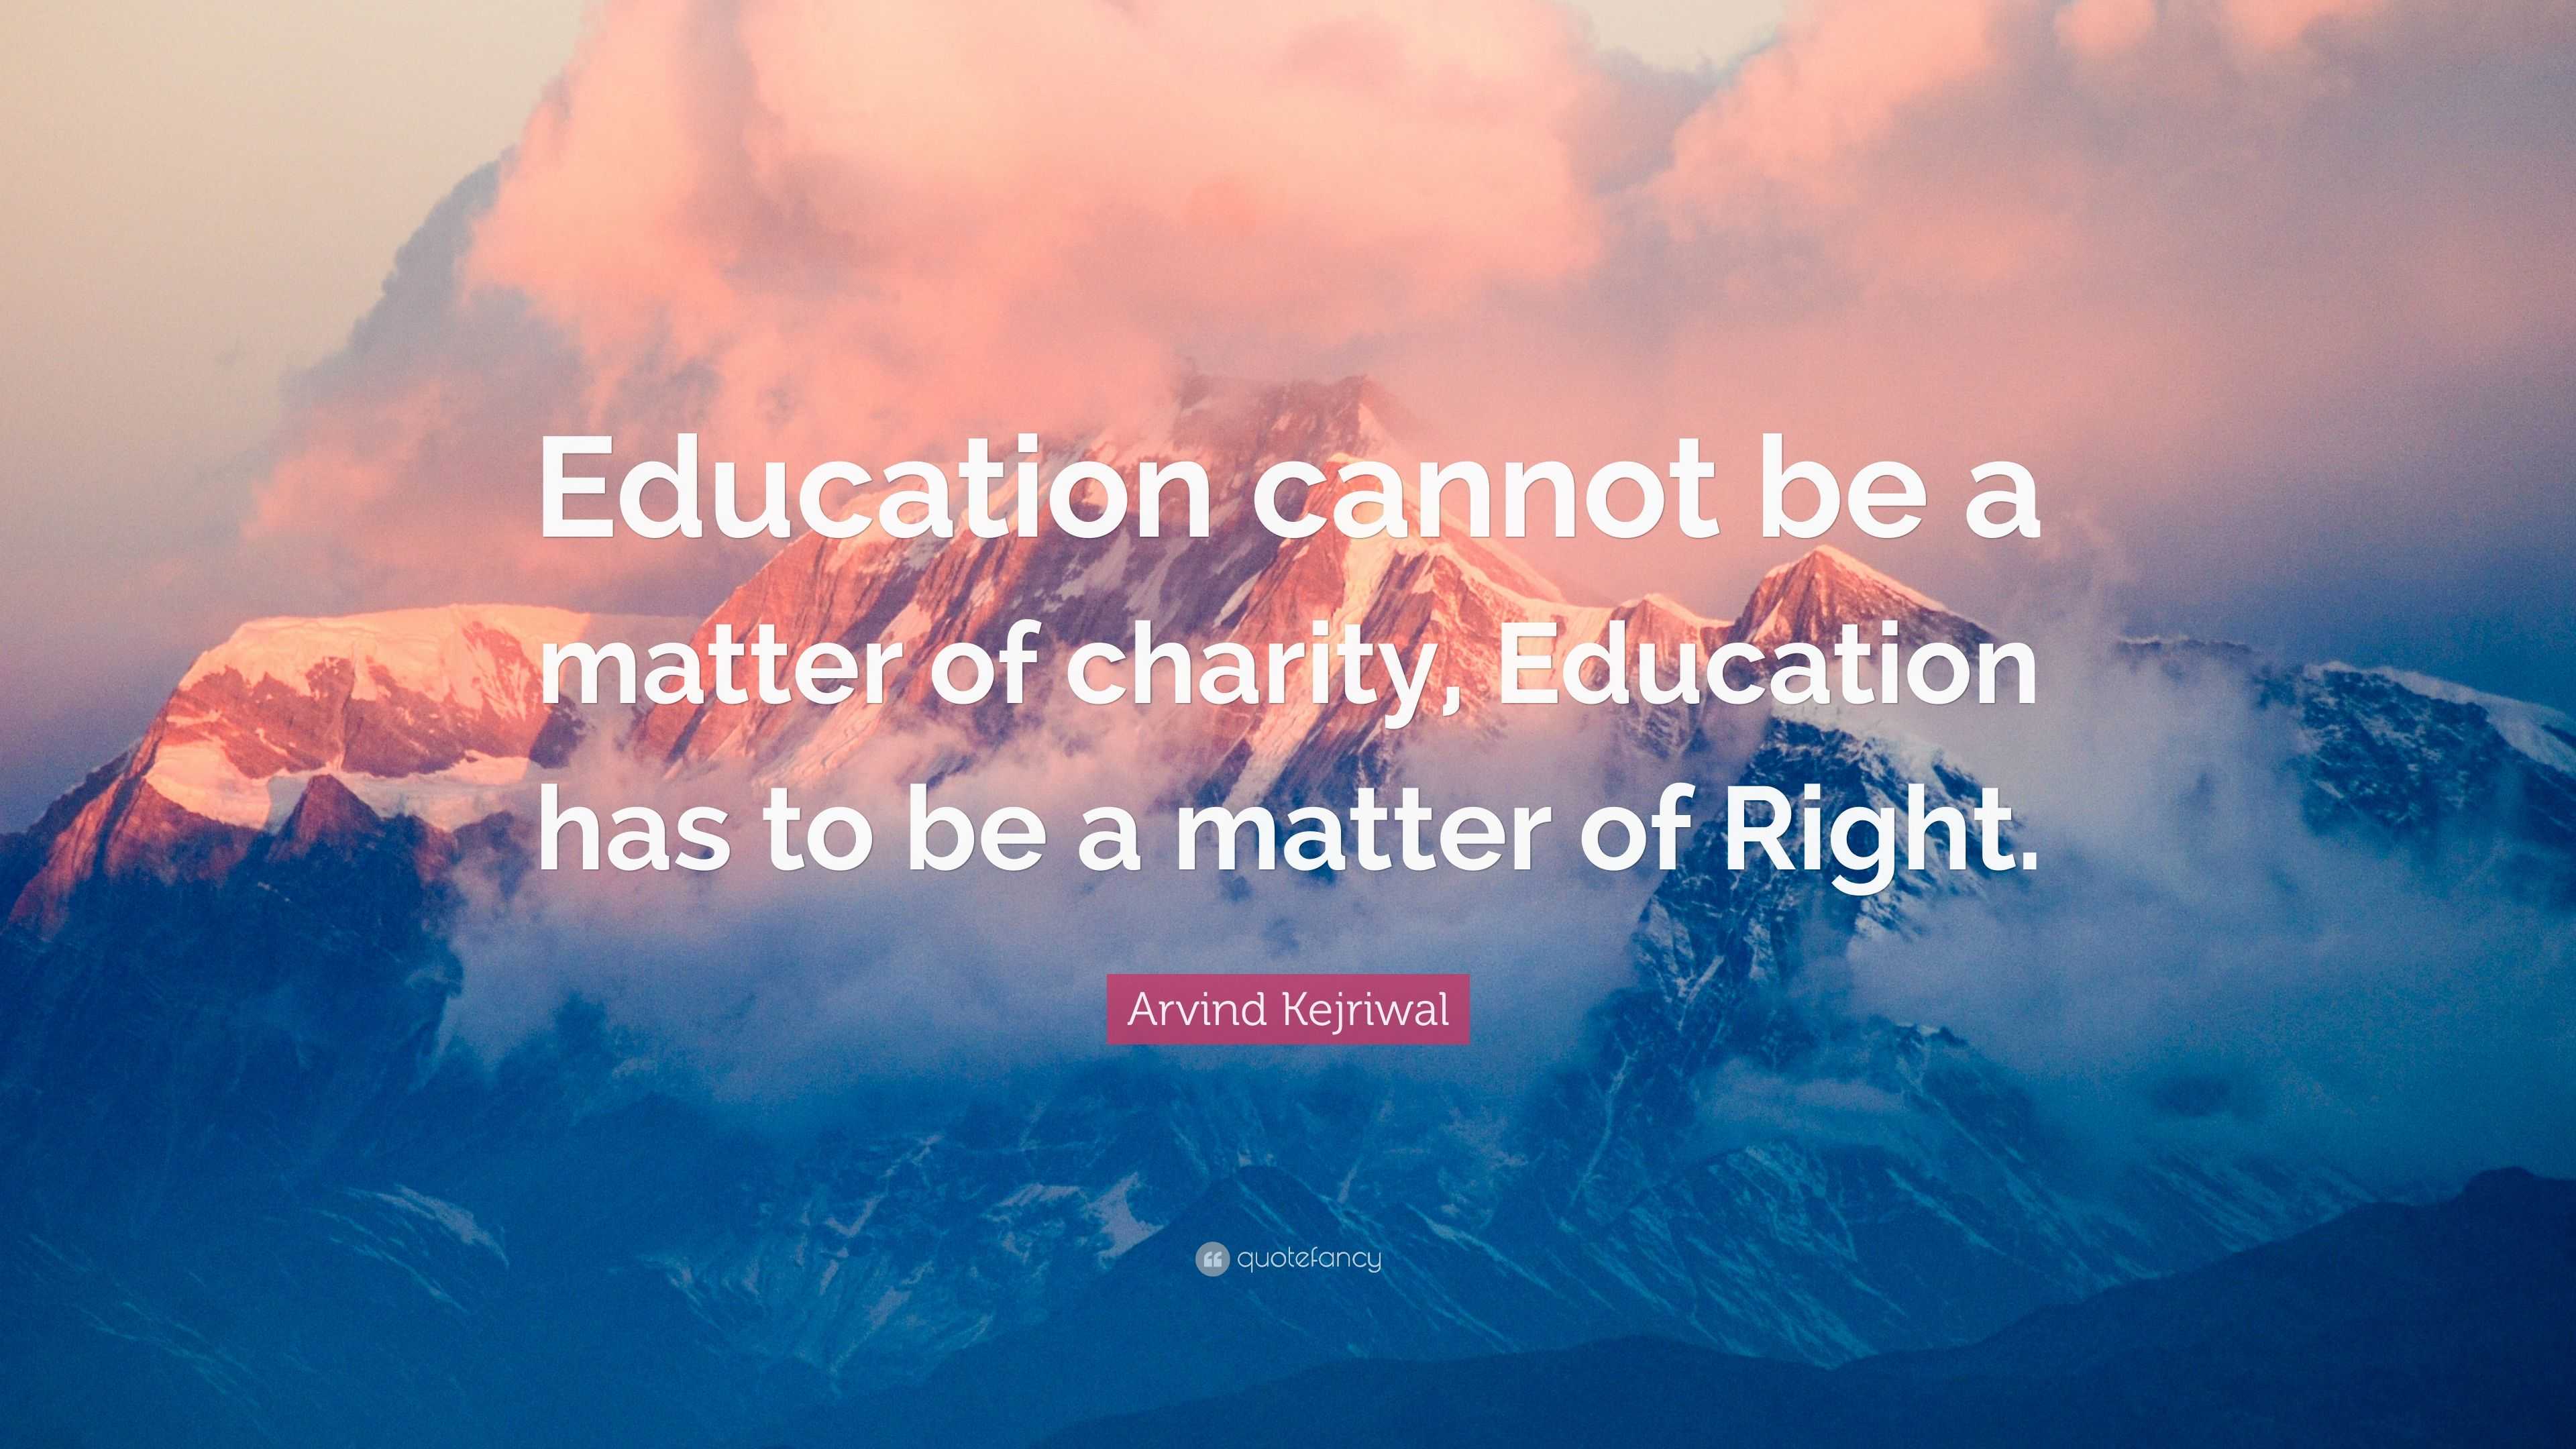 Arvind Kejriwal Quote: “Education cannot be a matter of charity ...